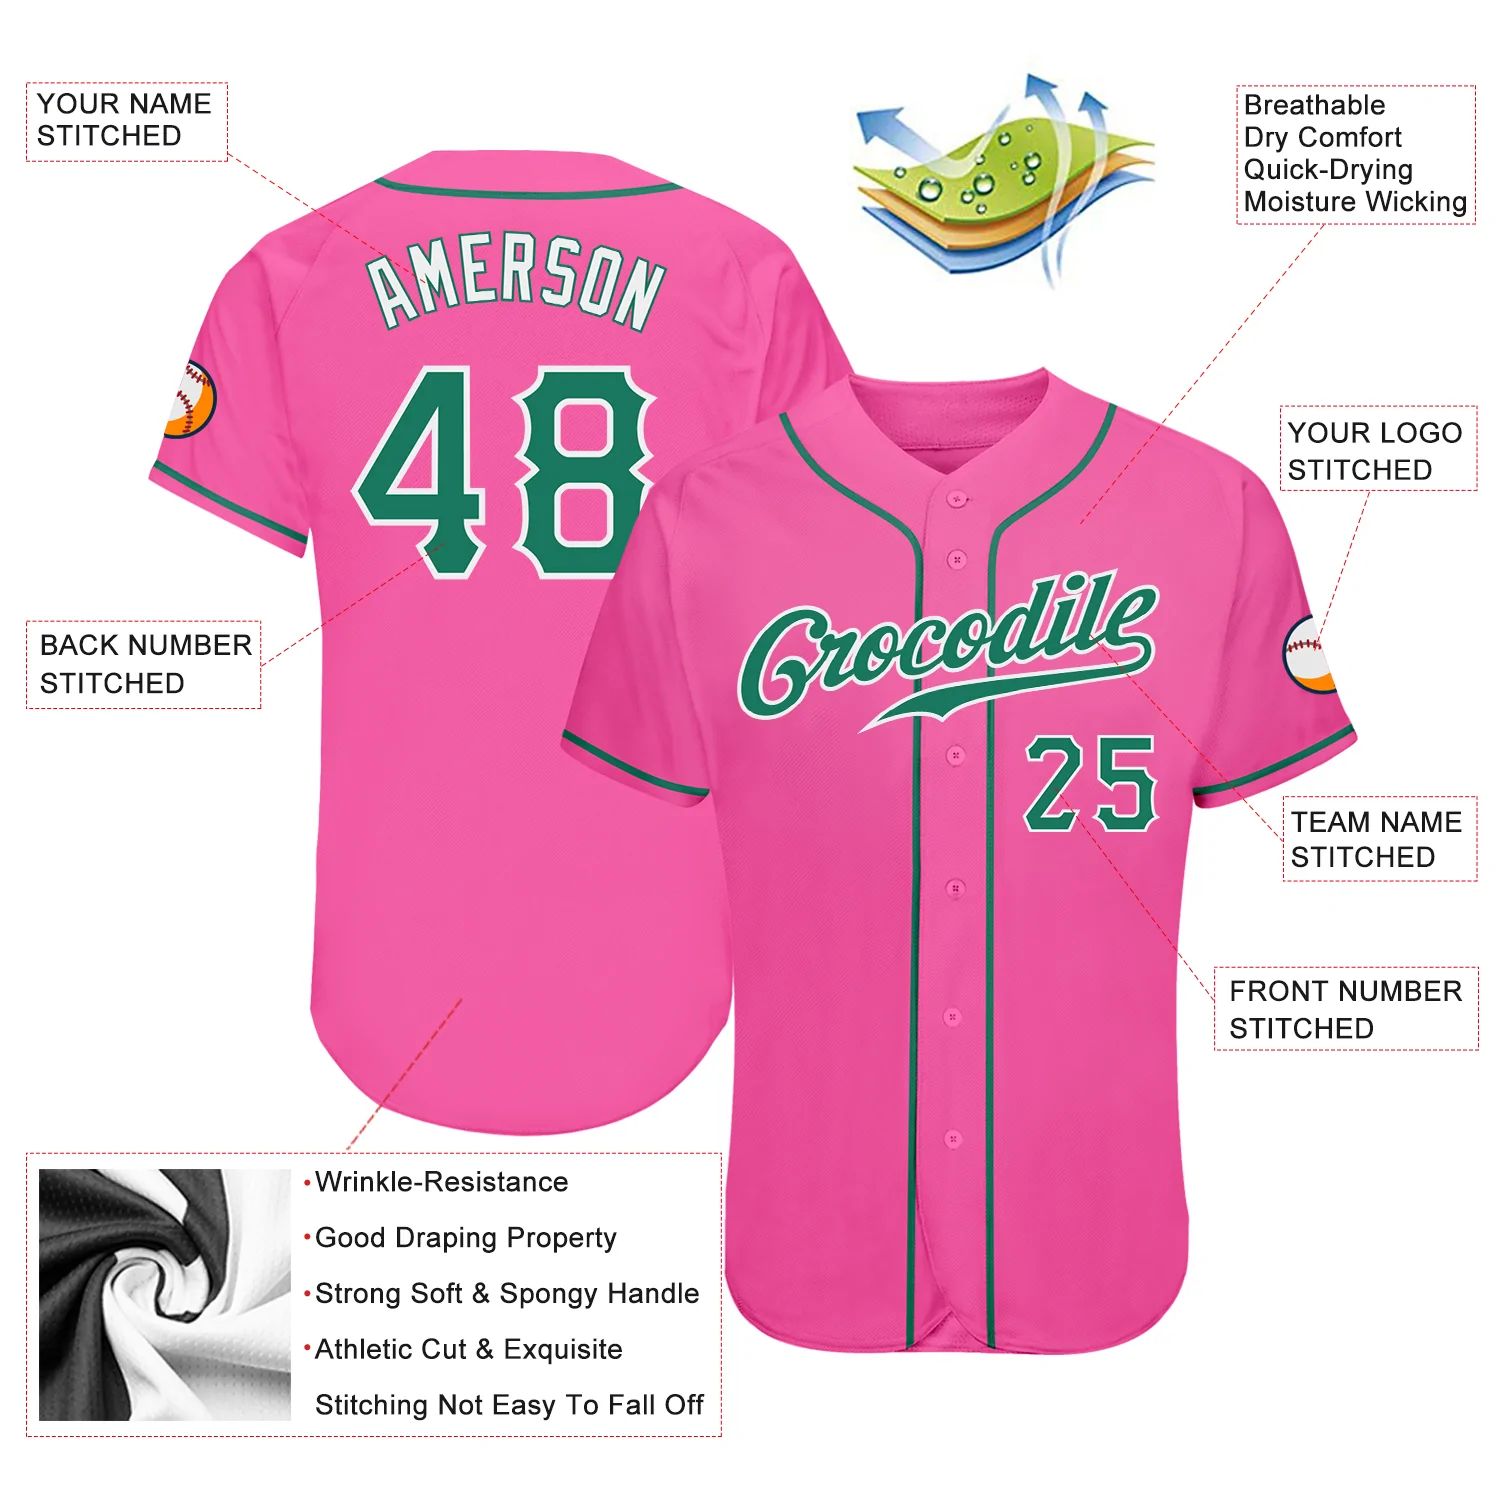 build-white-pink-baseball-kelly-green-jersey-authentic-pink0054-online-3.jpg